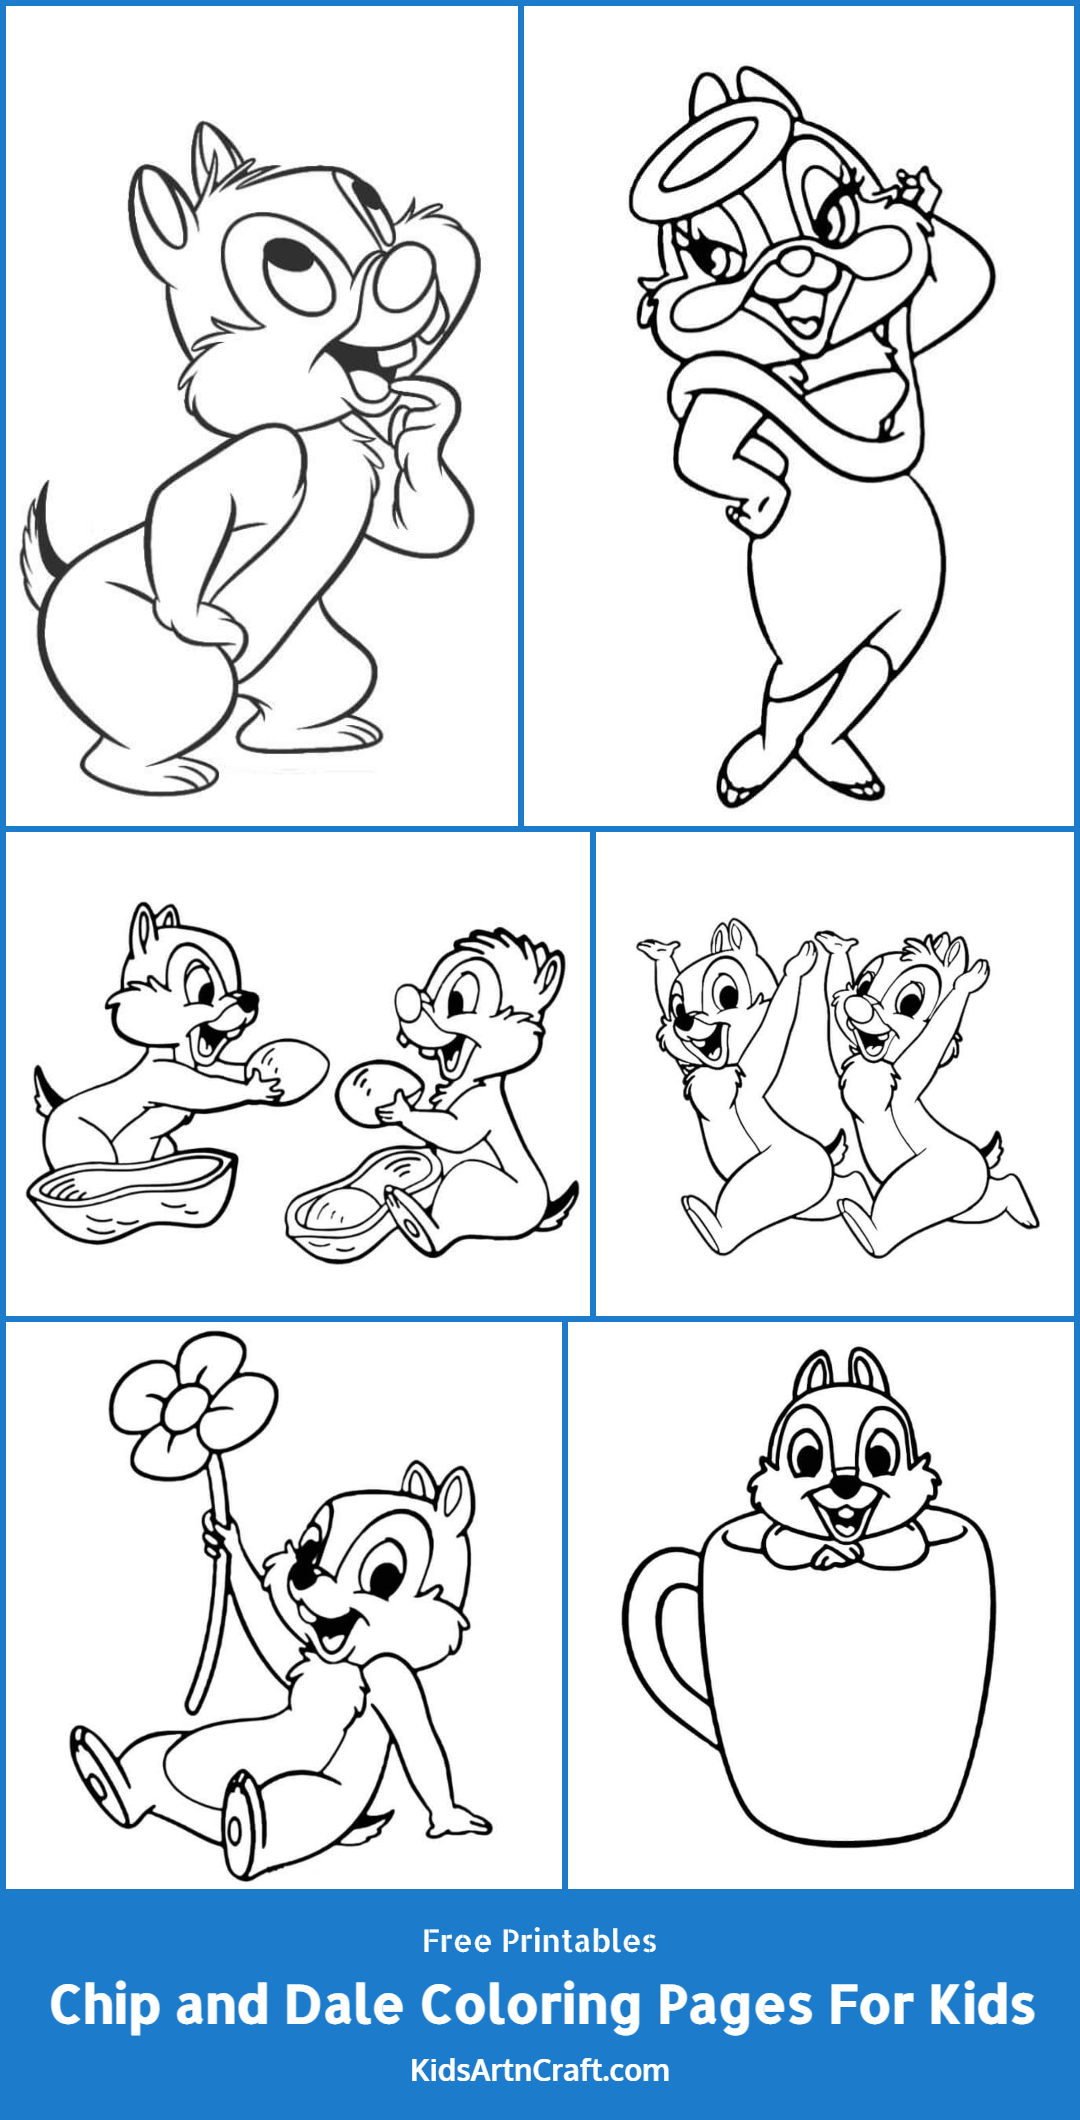 Chip and Dale Coloring Pages For Kids – Free Printables